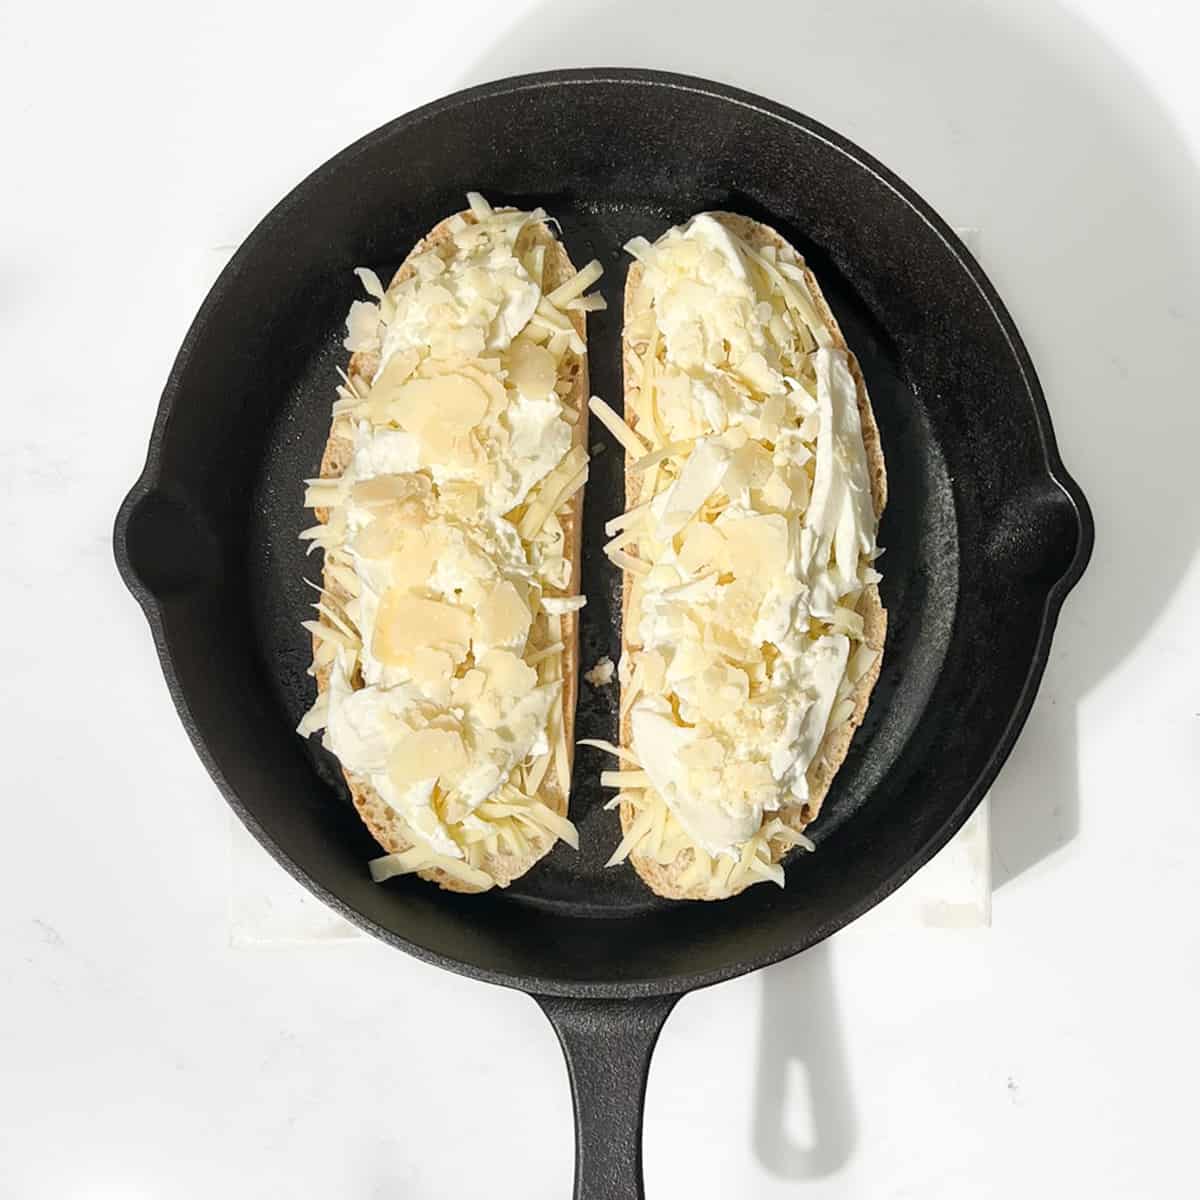 Adding tow slices of bread topped with cheese to a cast iron skillet.